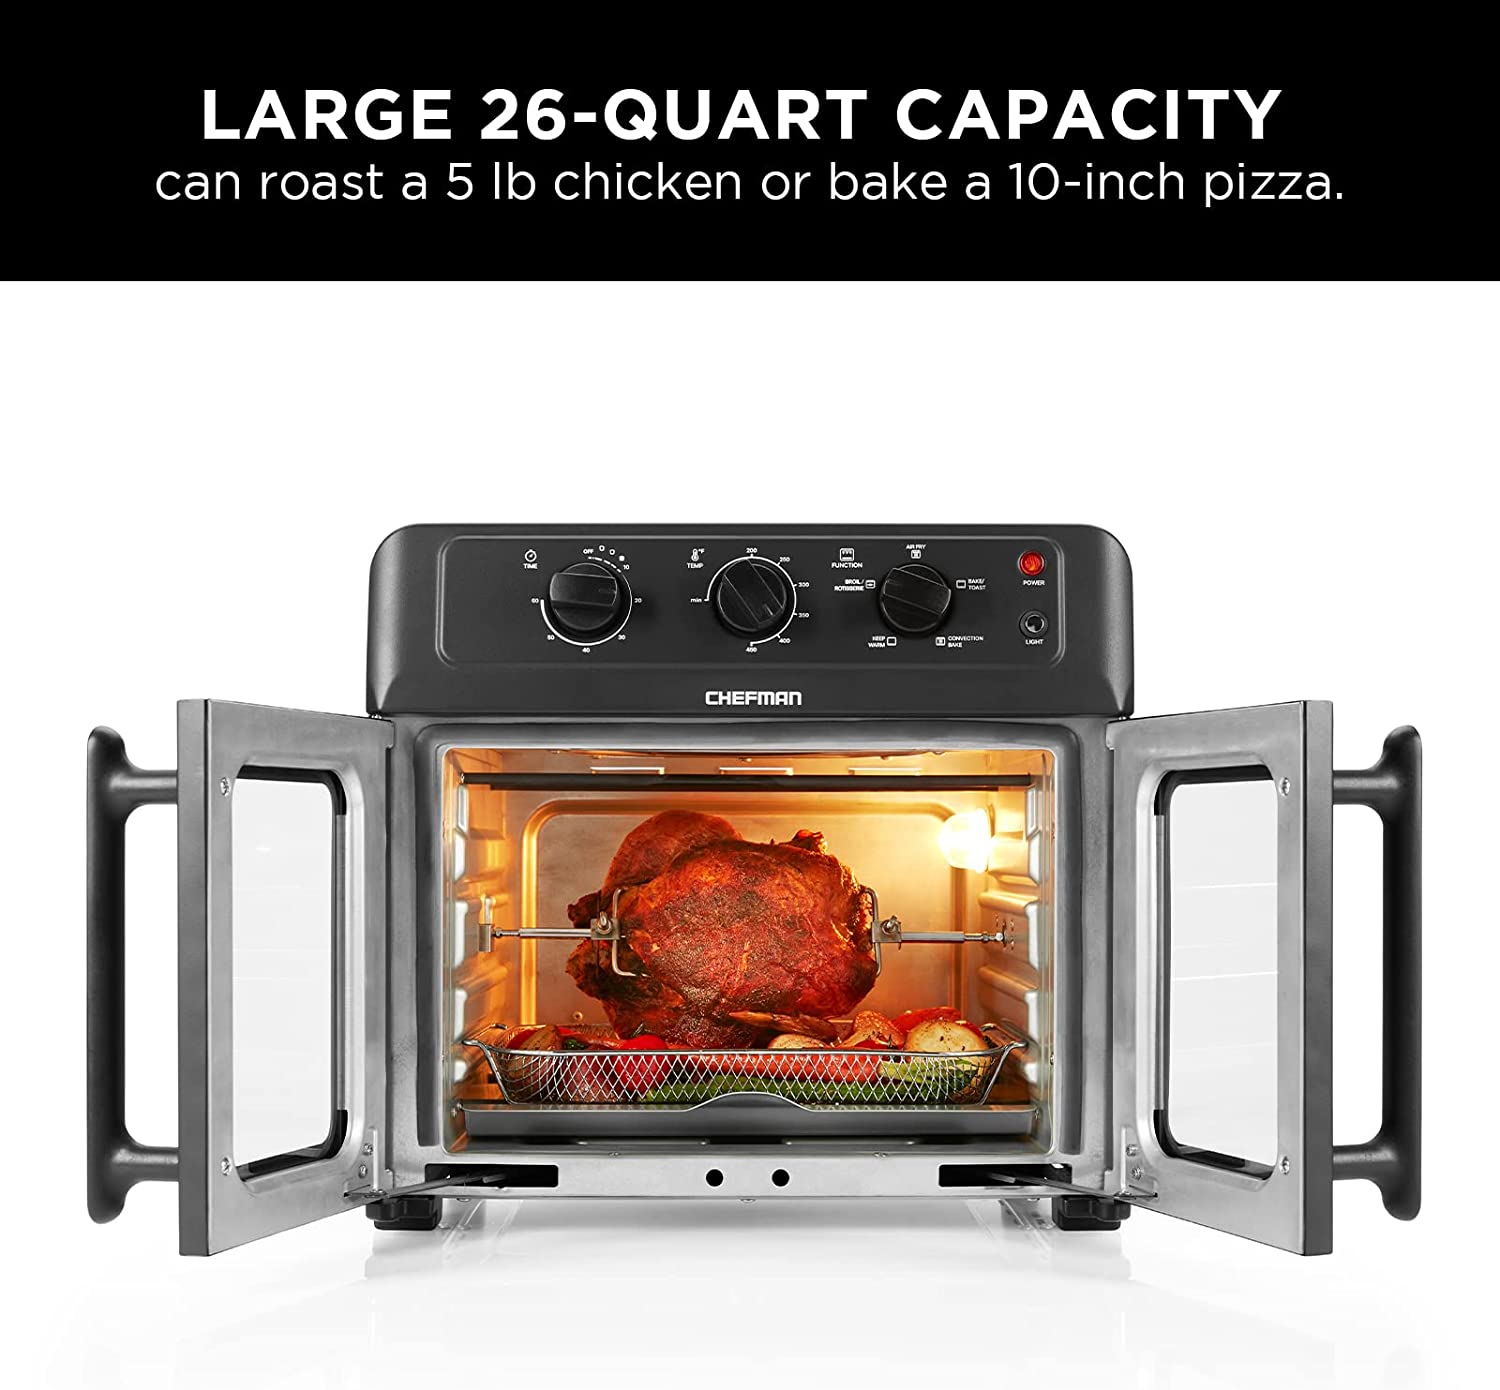 Chefman XL Air Fryer Oven w/ French Doors, 26 Qt Capacity, 5 Functions - Black, New - image 6 of 7